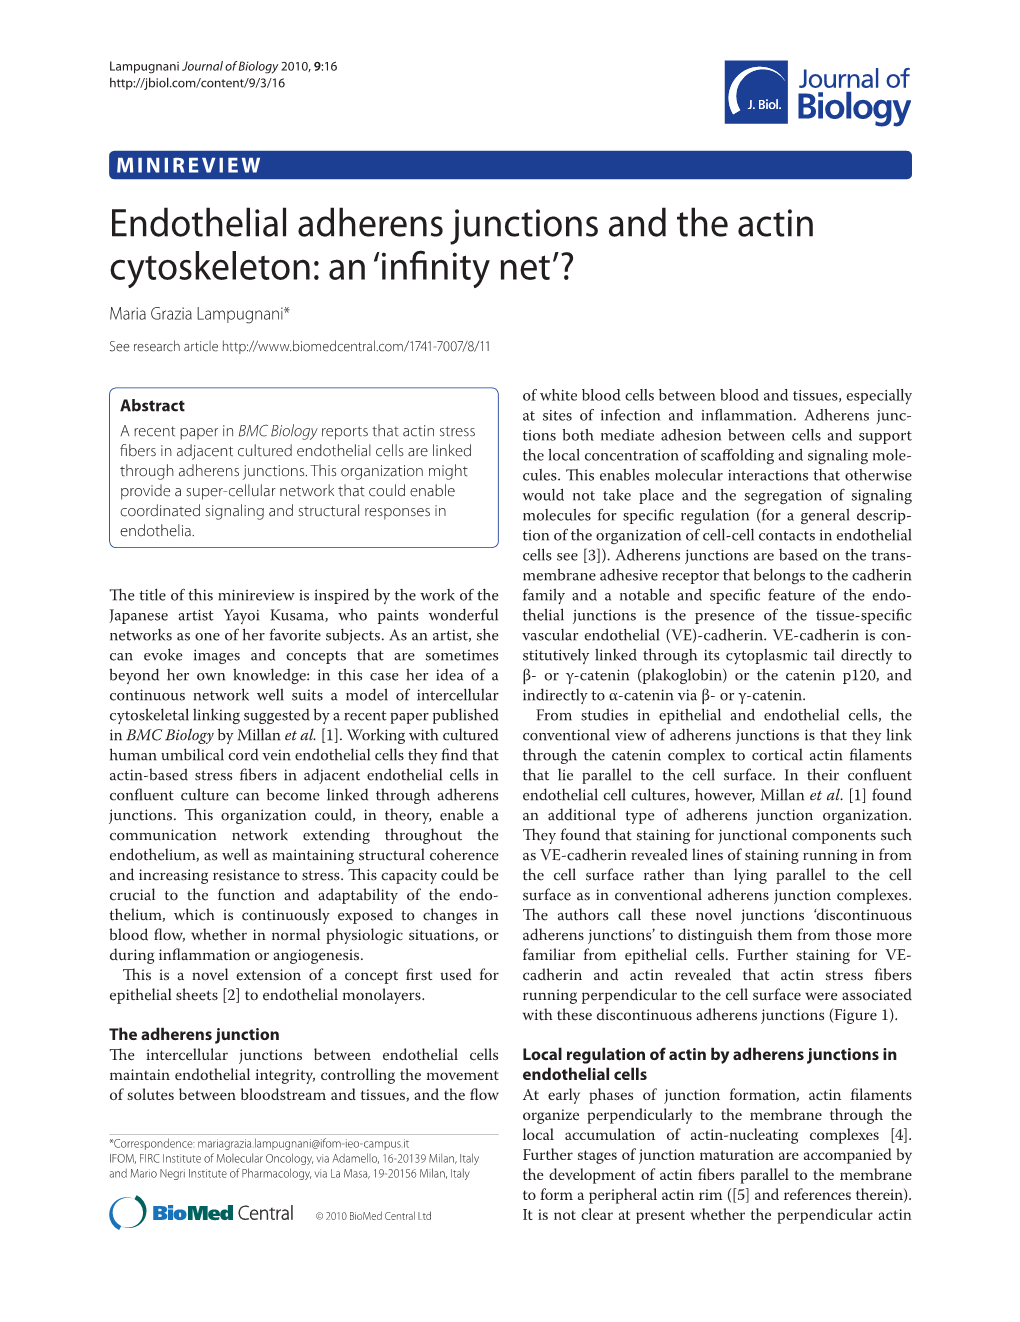 Endothelial Adherens Junctions and the Actin Cytoskeleton: an ‘Inﬁnity Net’? Maria Grazia Lampugnani*